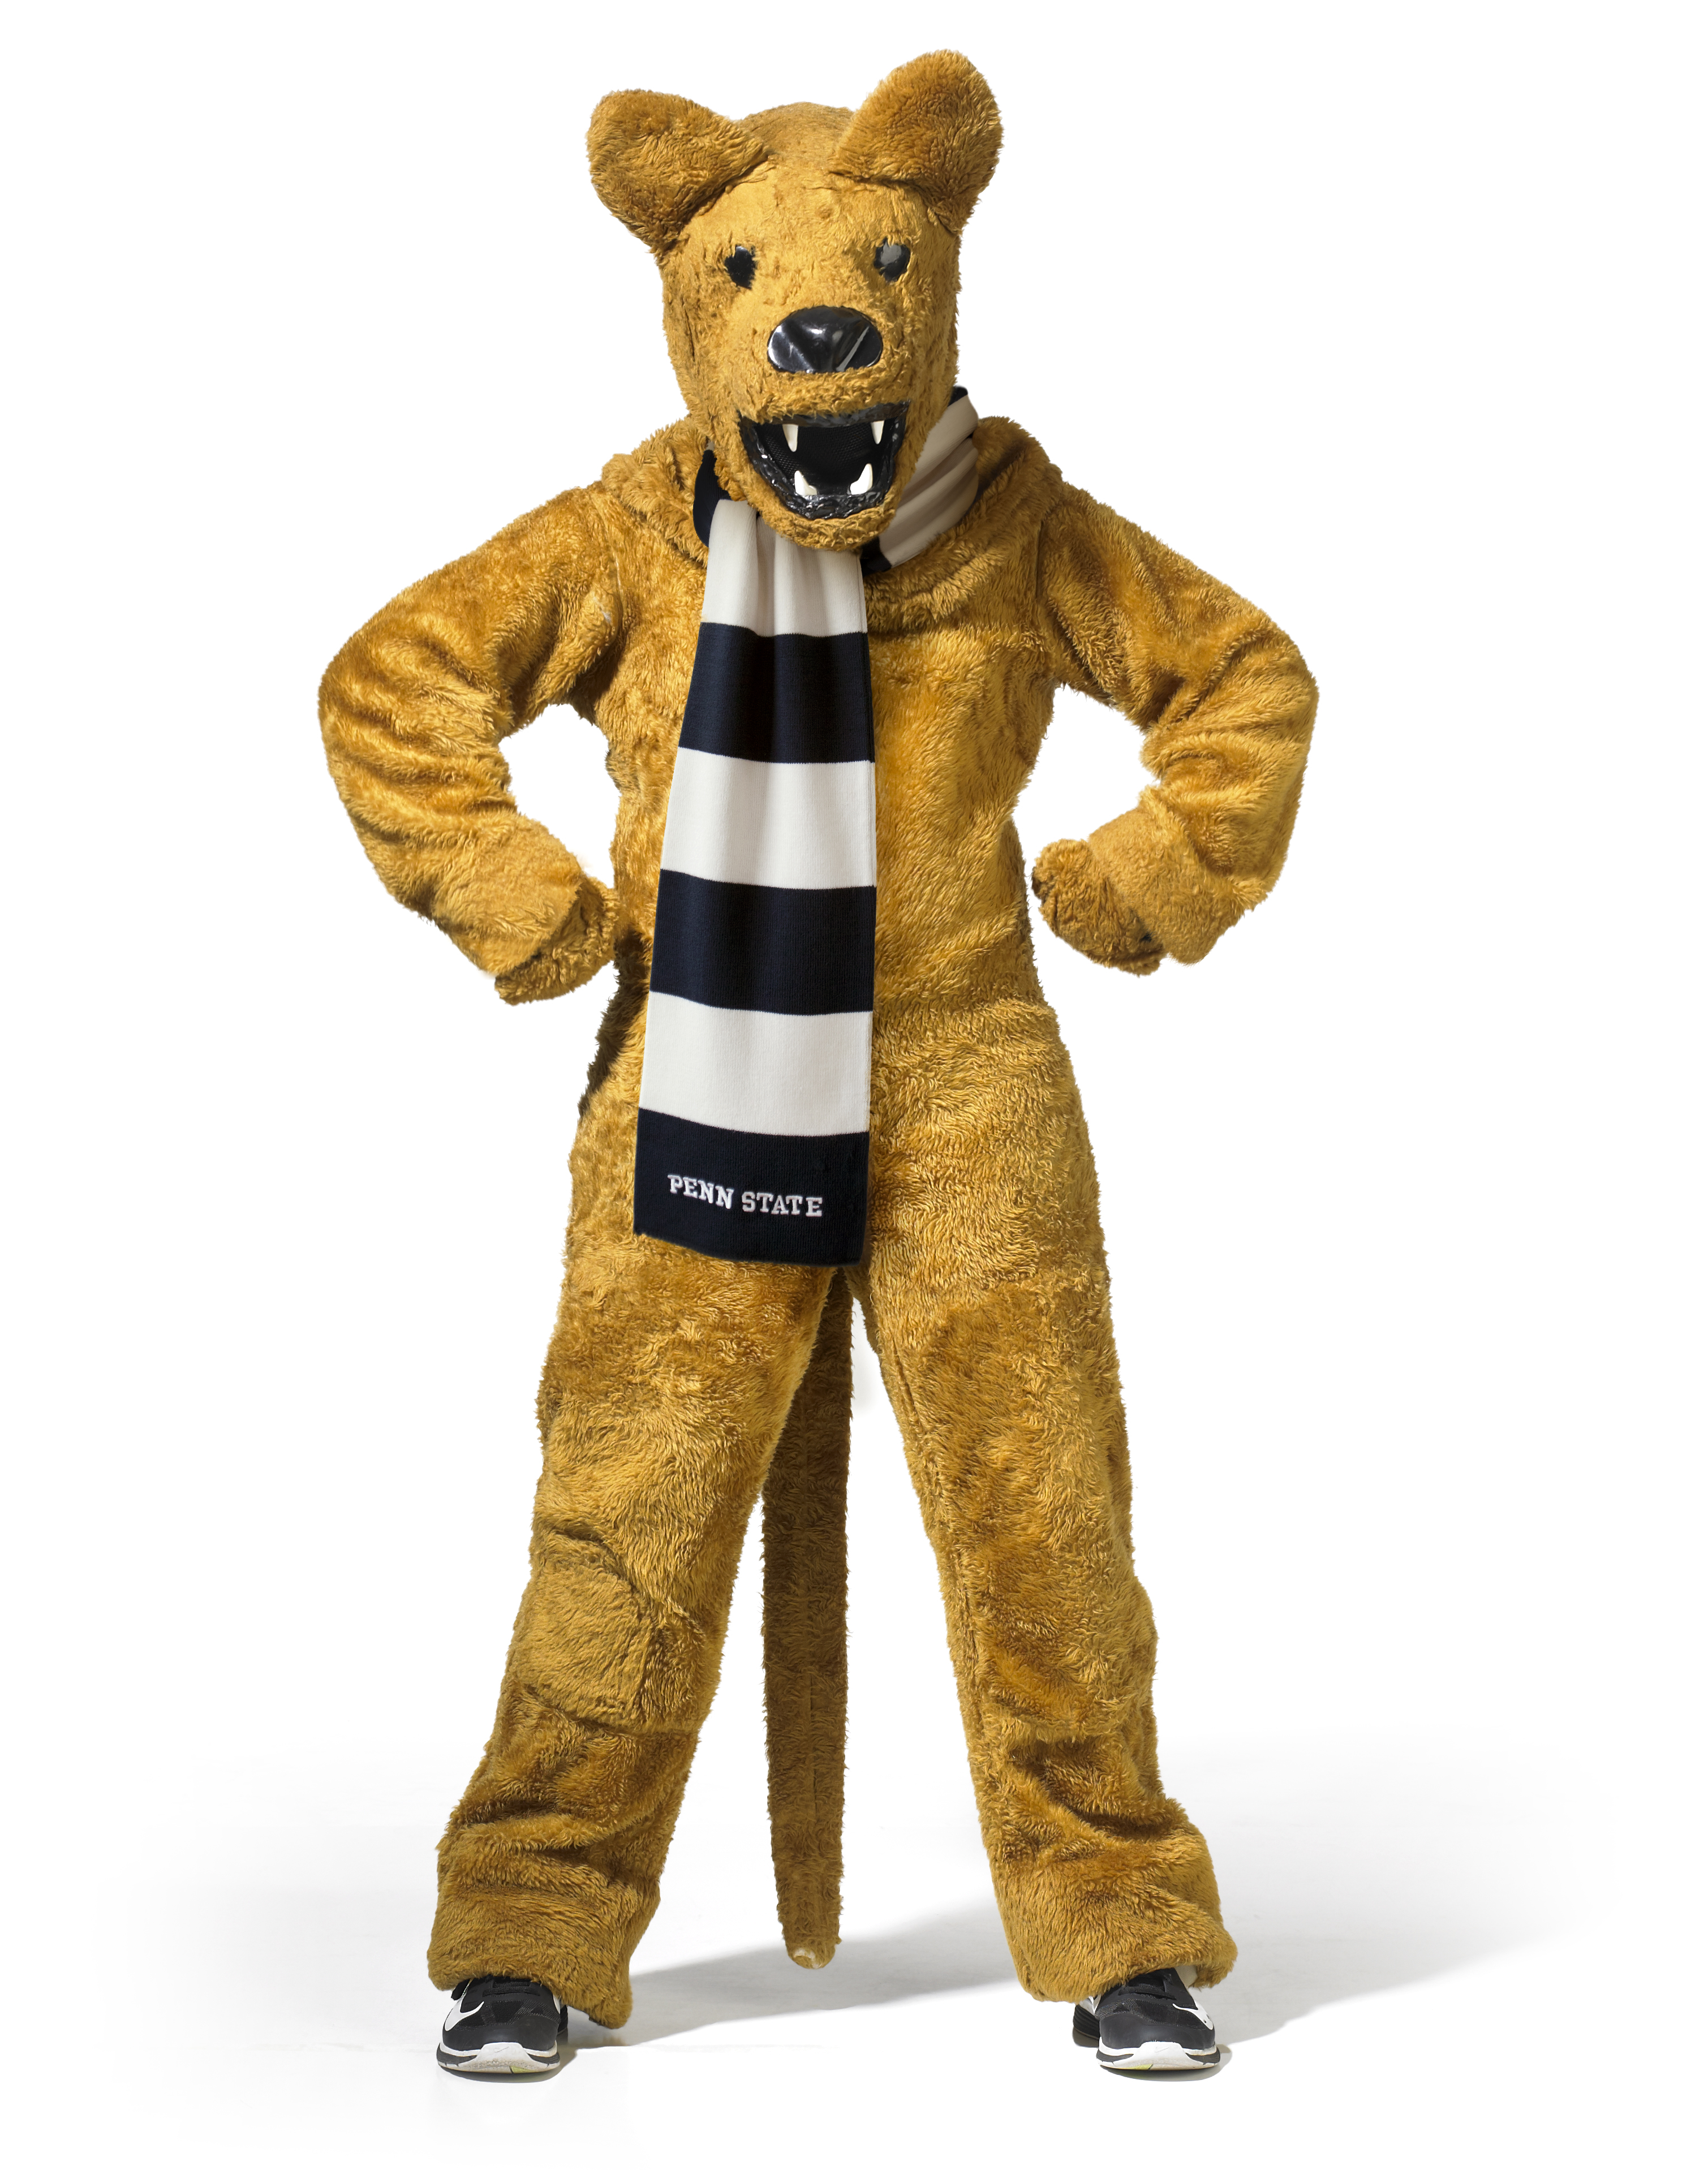 Nittany Lion as of 2013